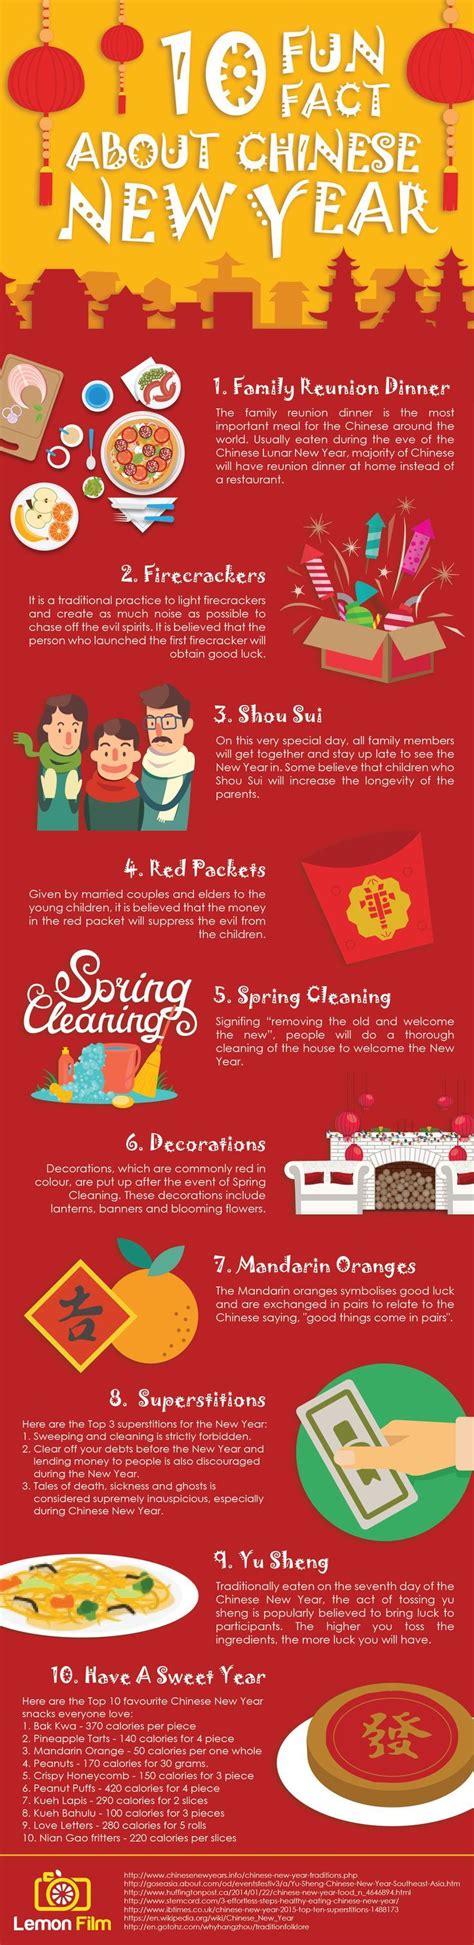 Infographic From Traditions To Superstitions Here Are The 10 Fun